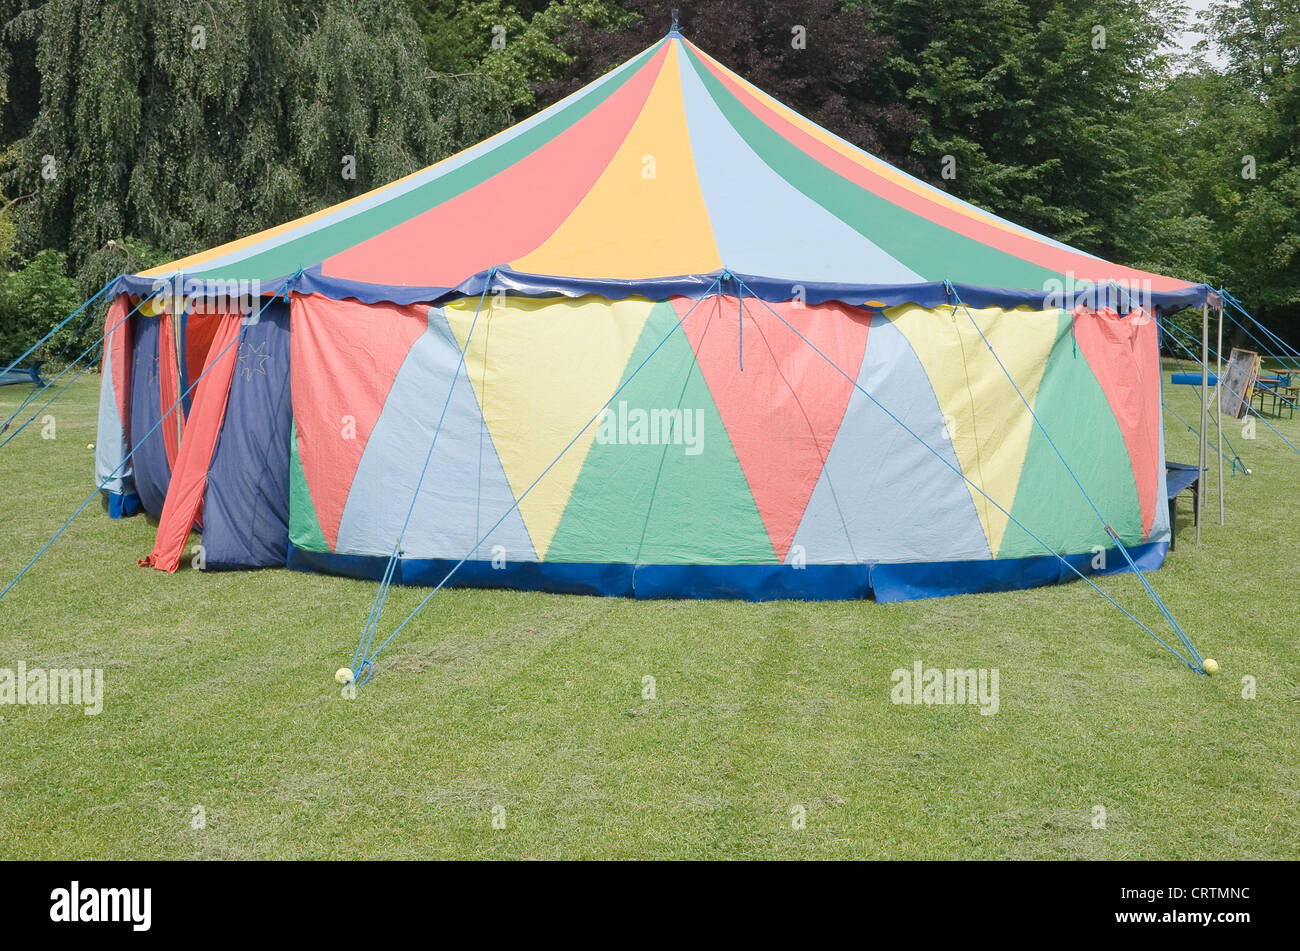 Small Circus Tent High Resolution Stock Photography and Images - Alamy